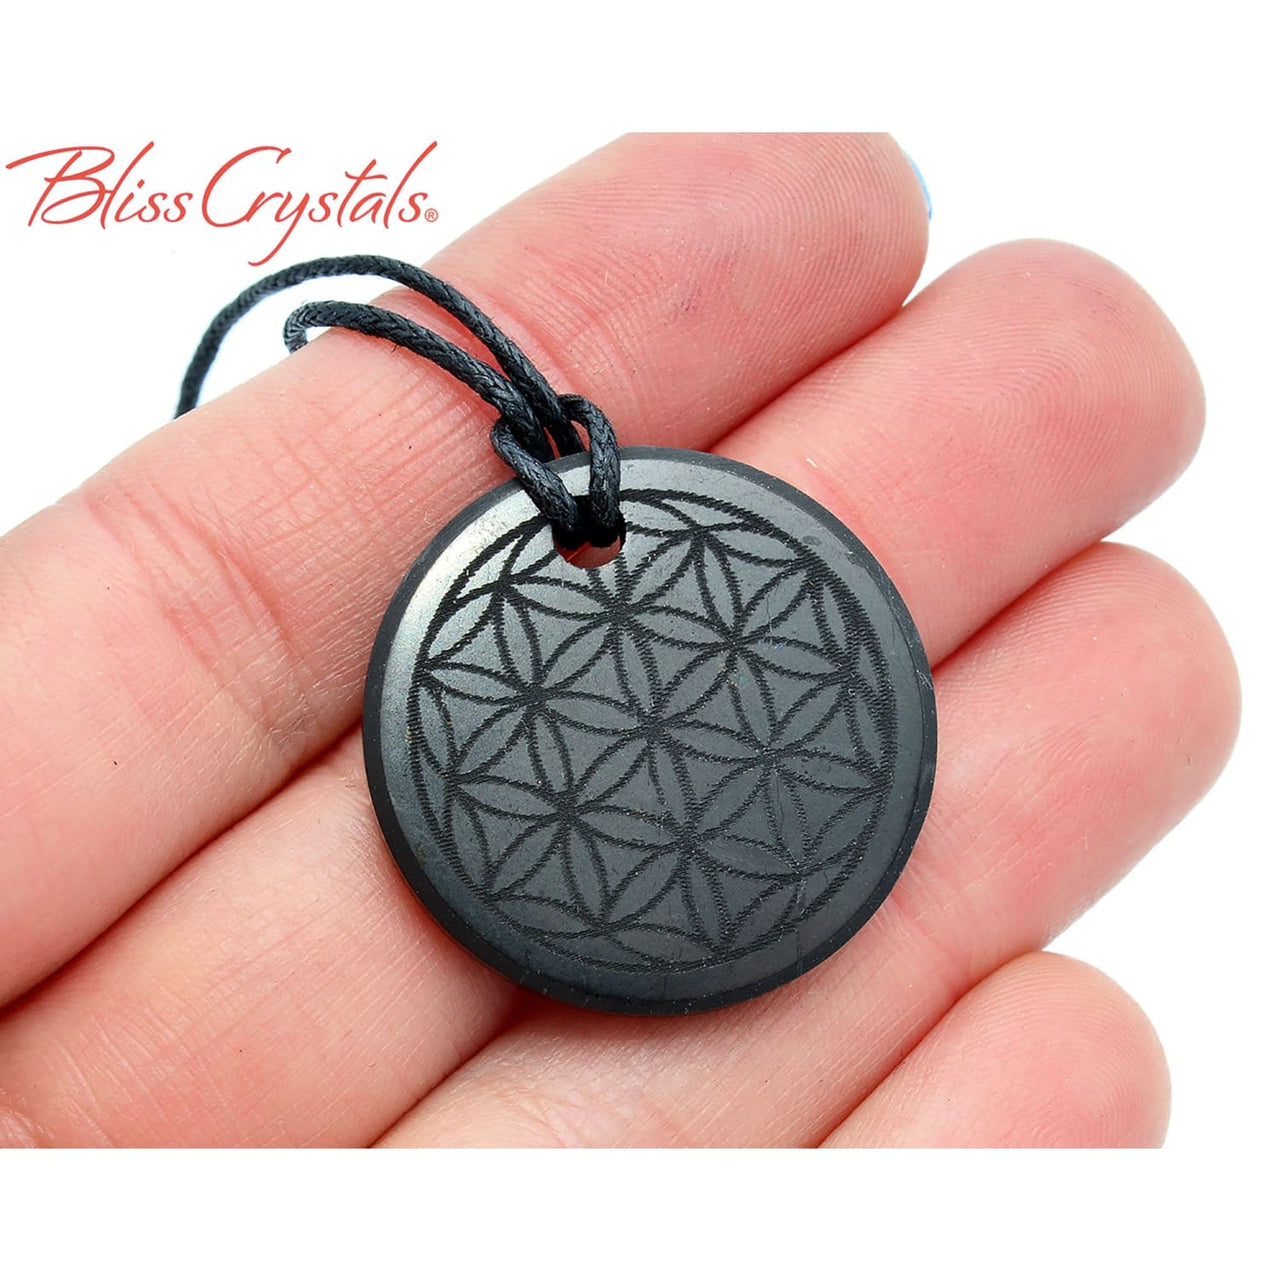 Shungite Flower of Life Round Pendant w/ Cord for protection